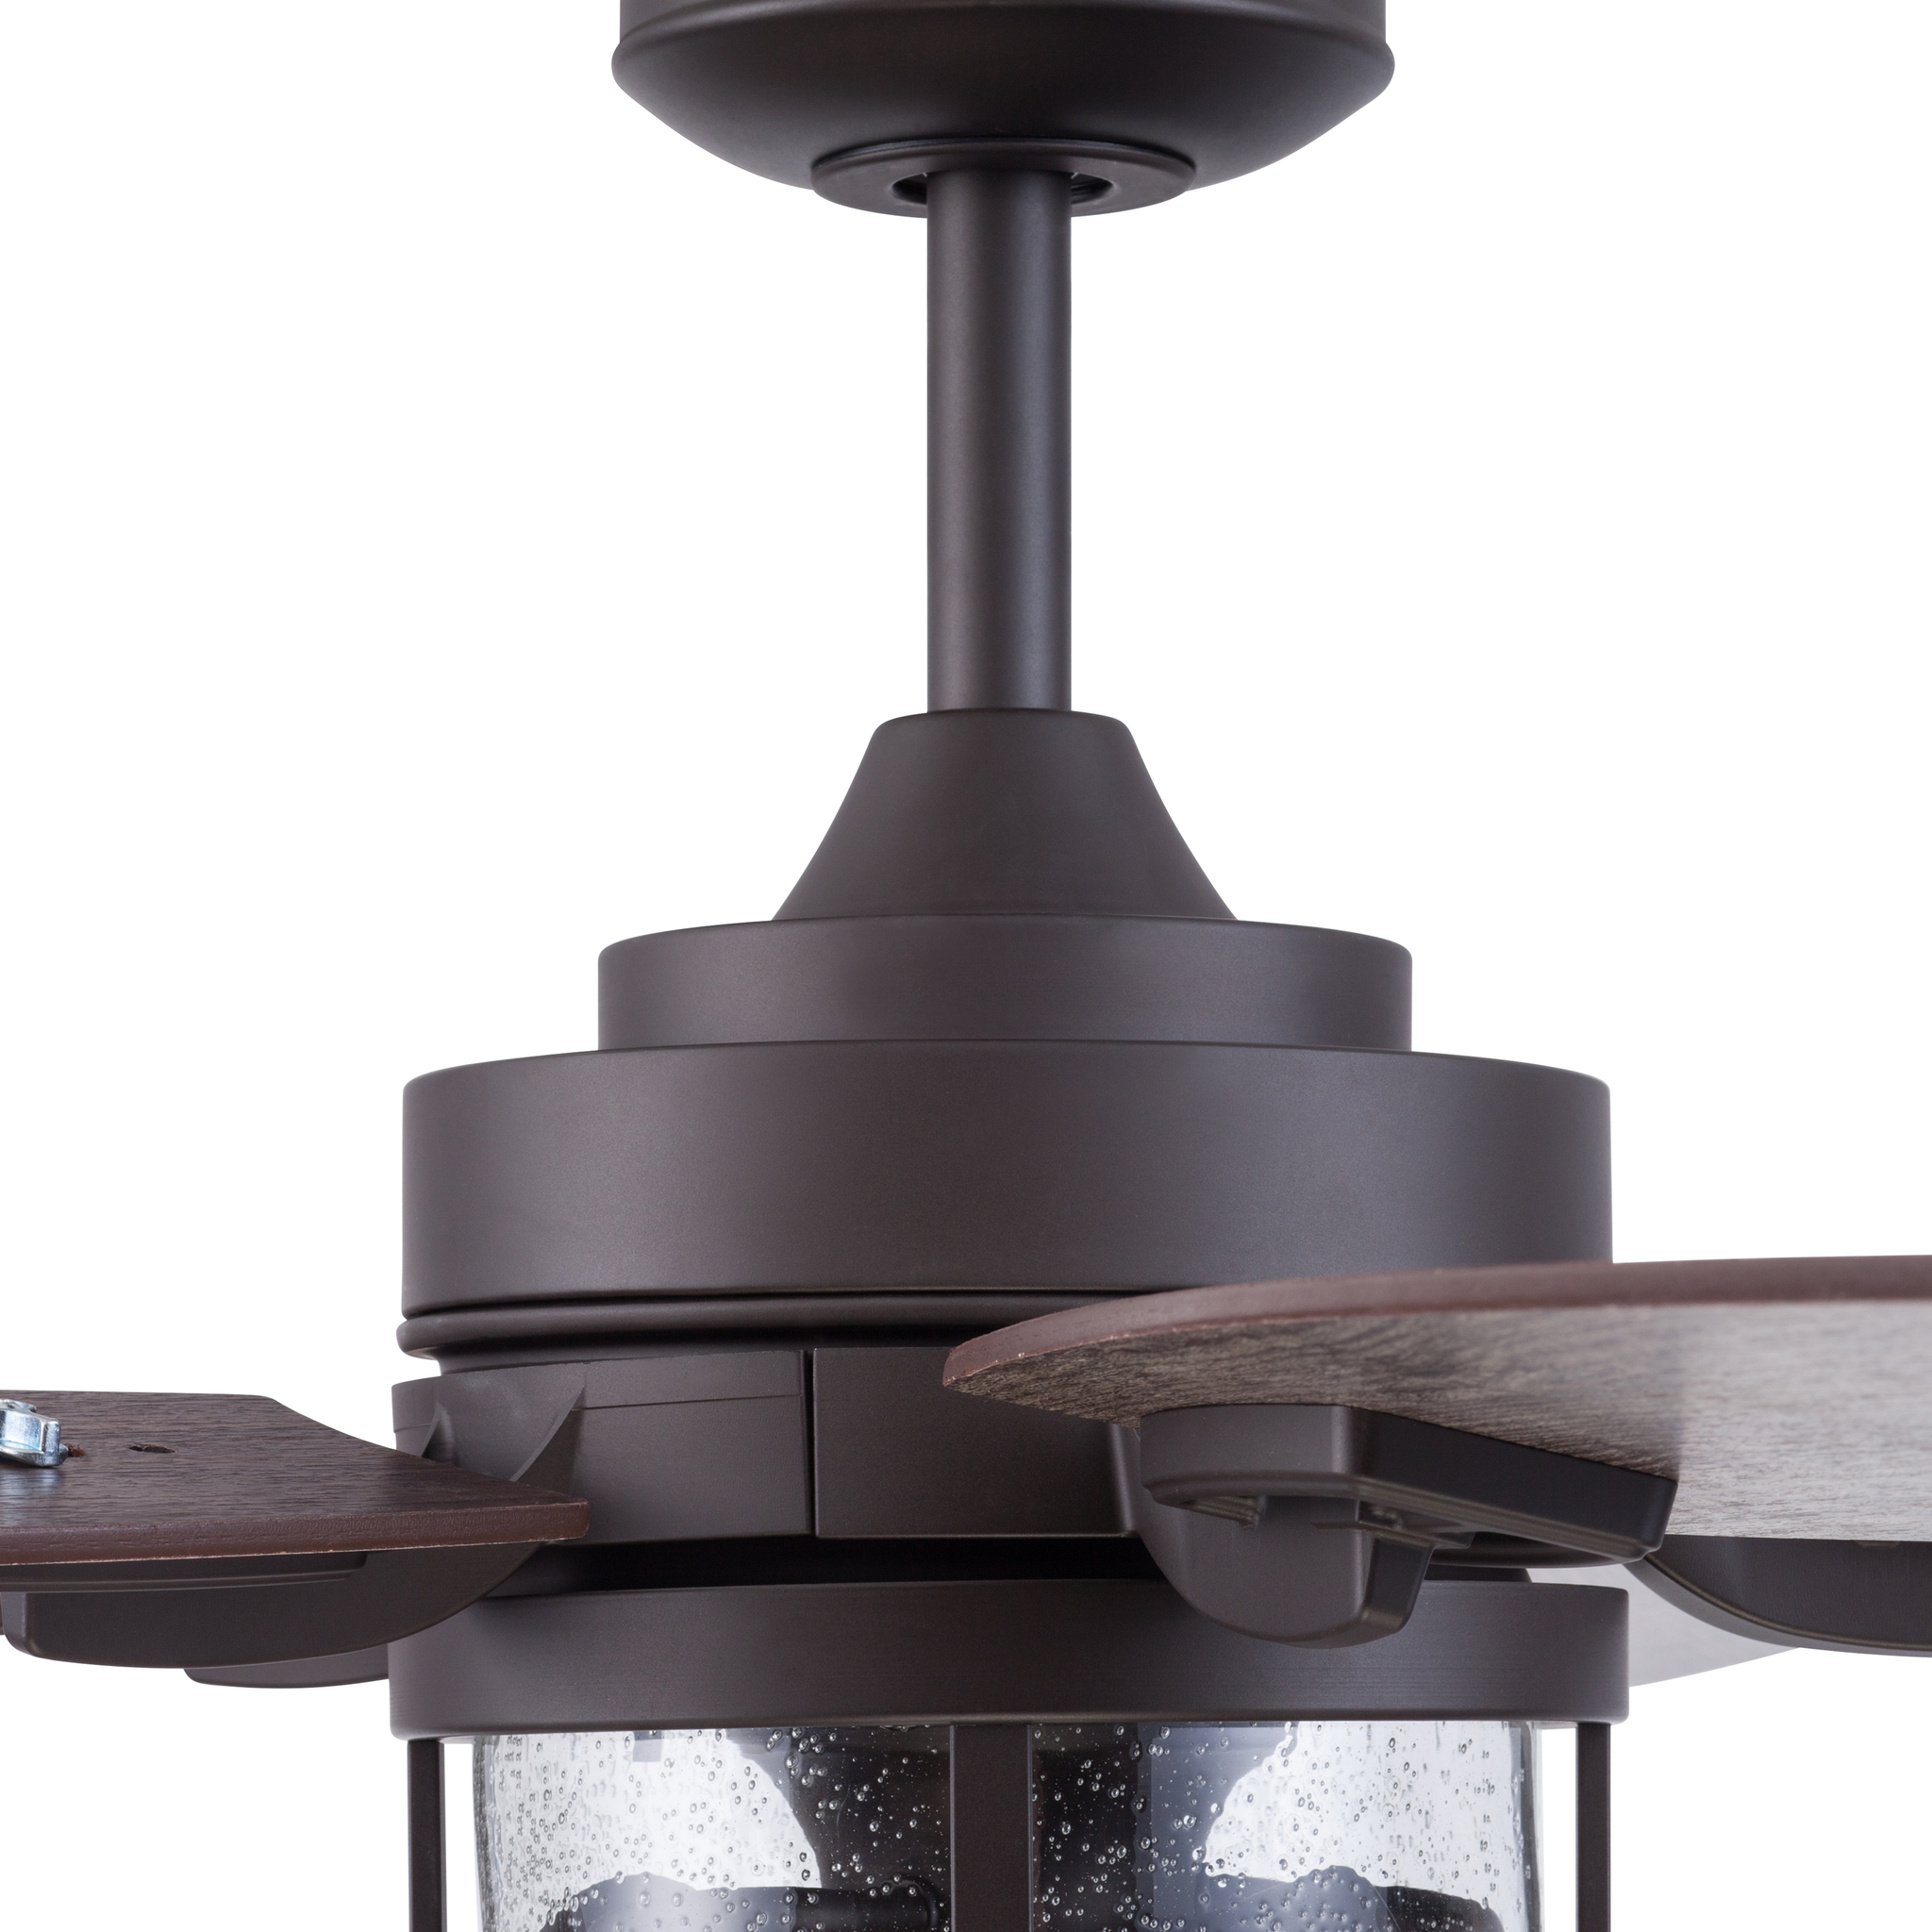 52 Inch Idris, Iron, Remote Control, Indoor/Outdoor Ceiling Fan by Prominence Home